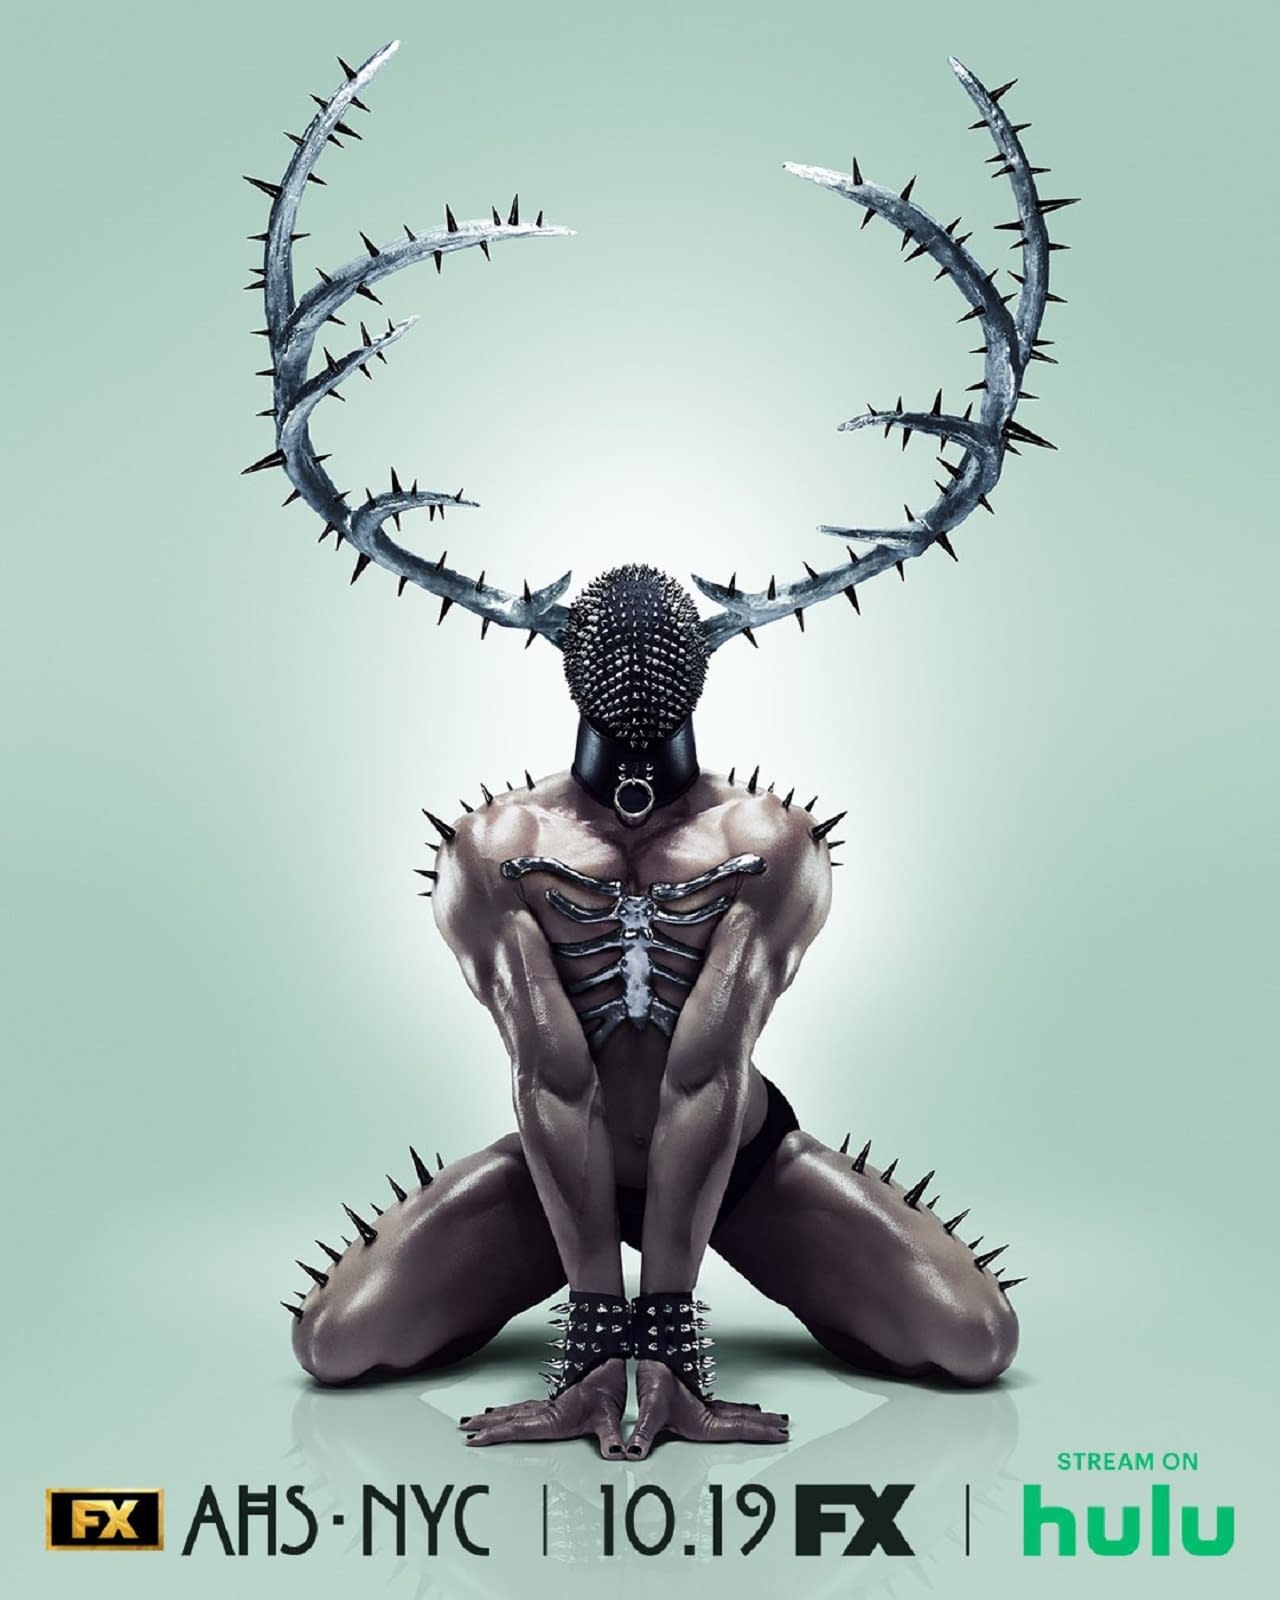 American Horror Story S New Ahs Nyc Key Art Urges Us To Give In